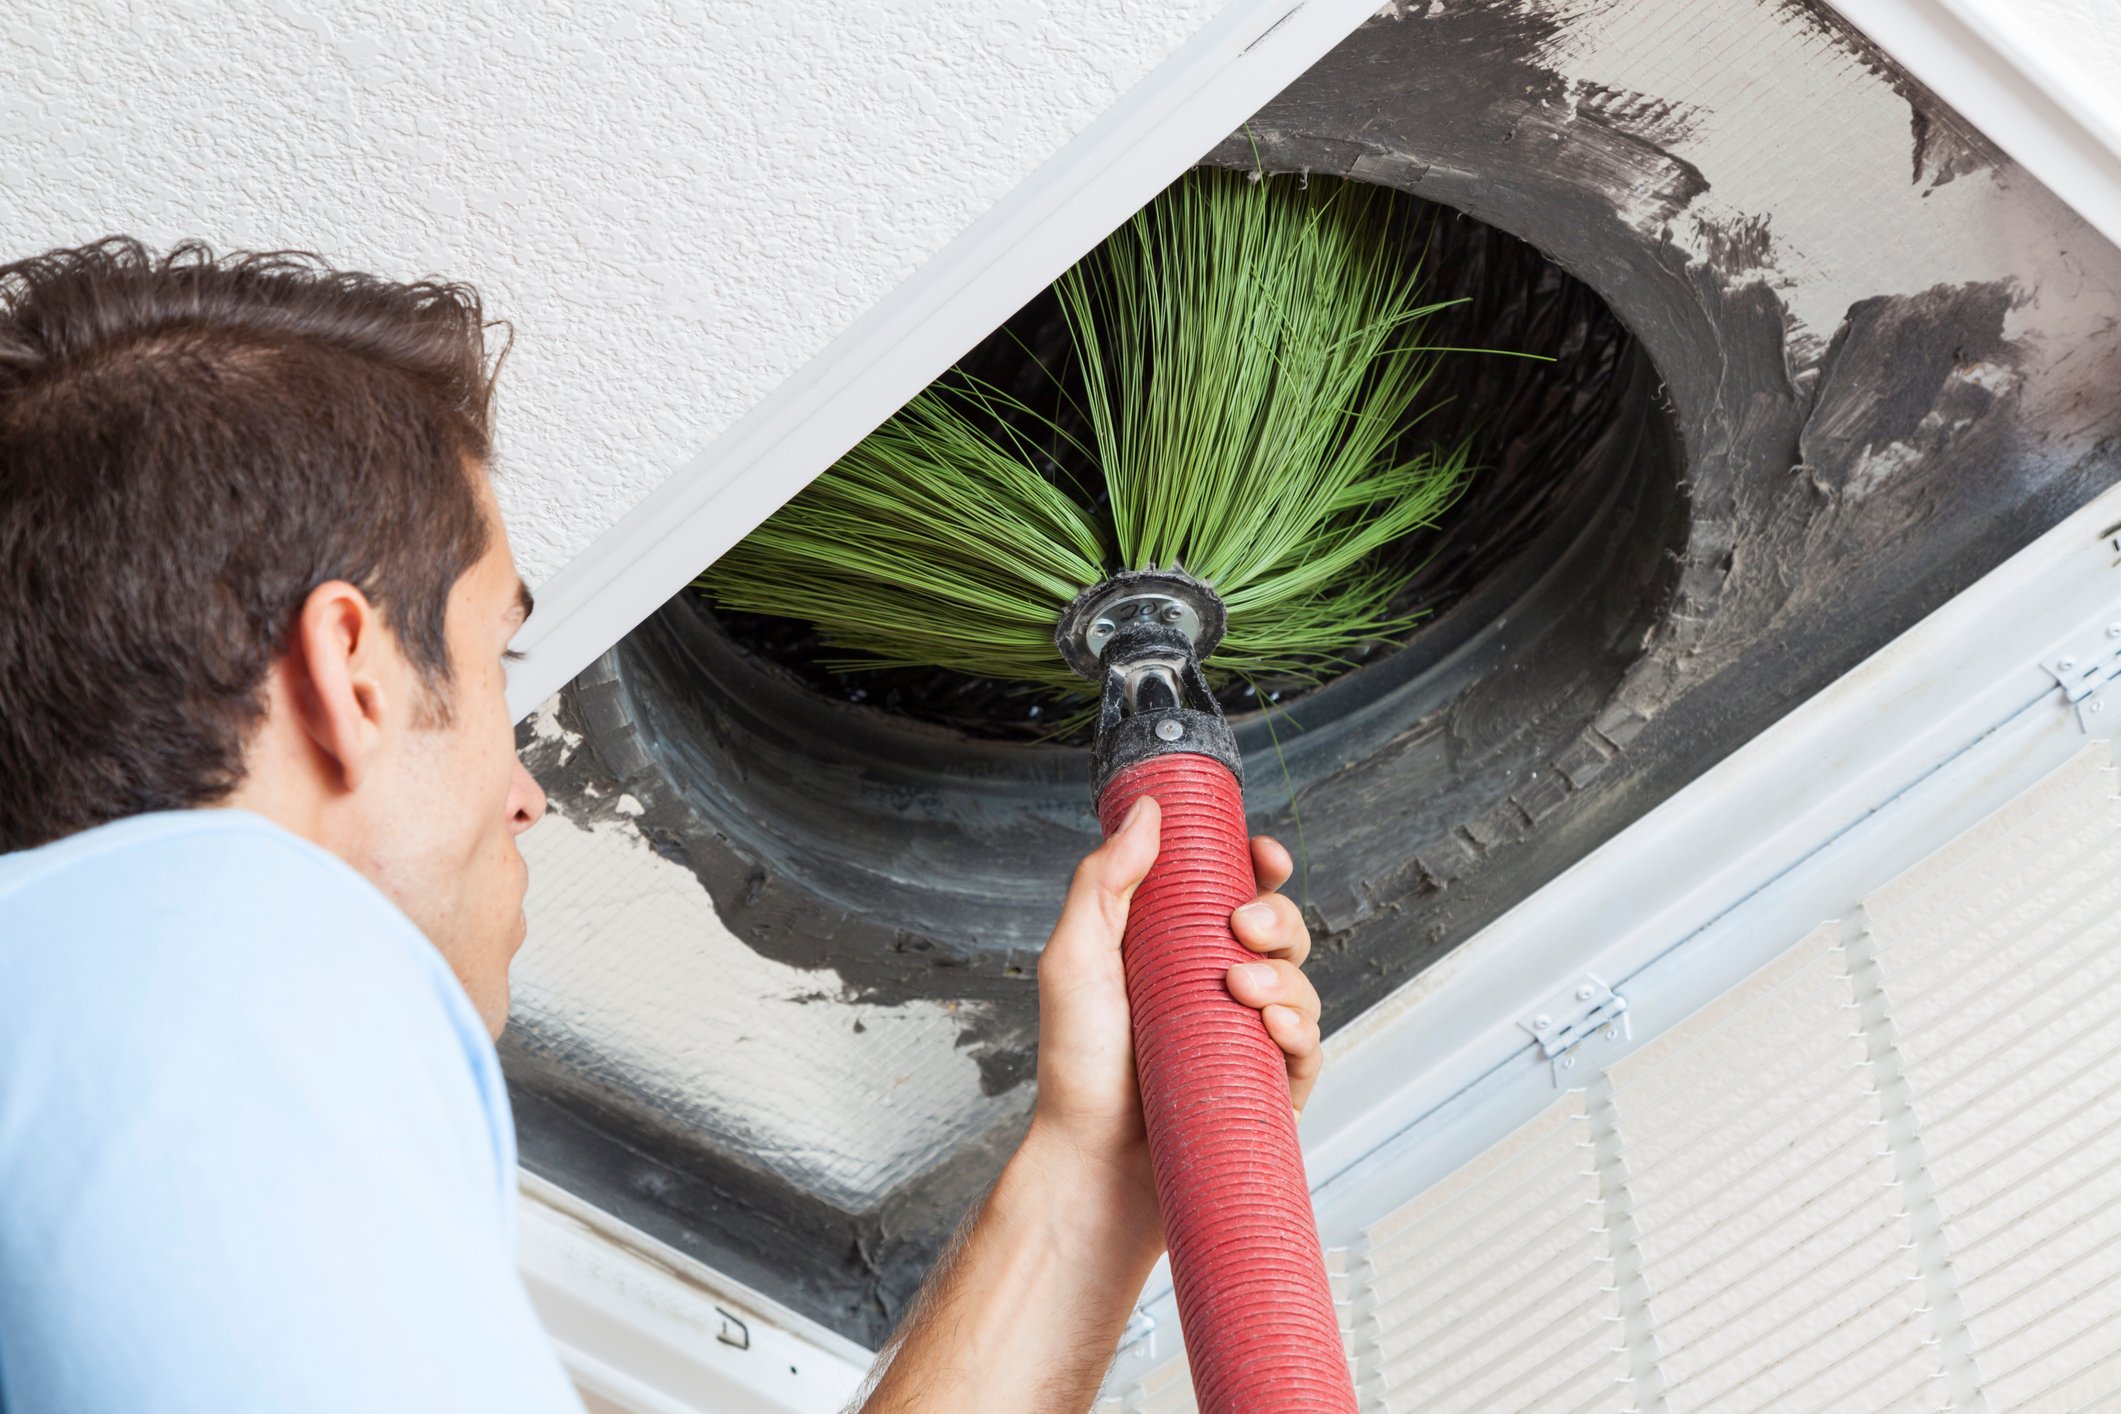 Cleaning Air Ducts Yourself: Do the Risks Outweigh the Rewards?